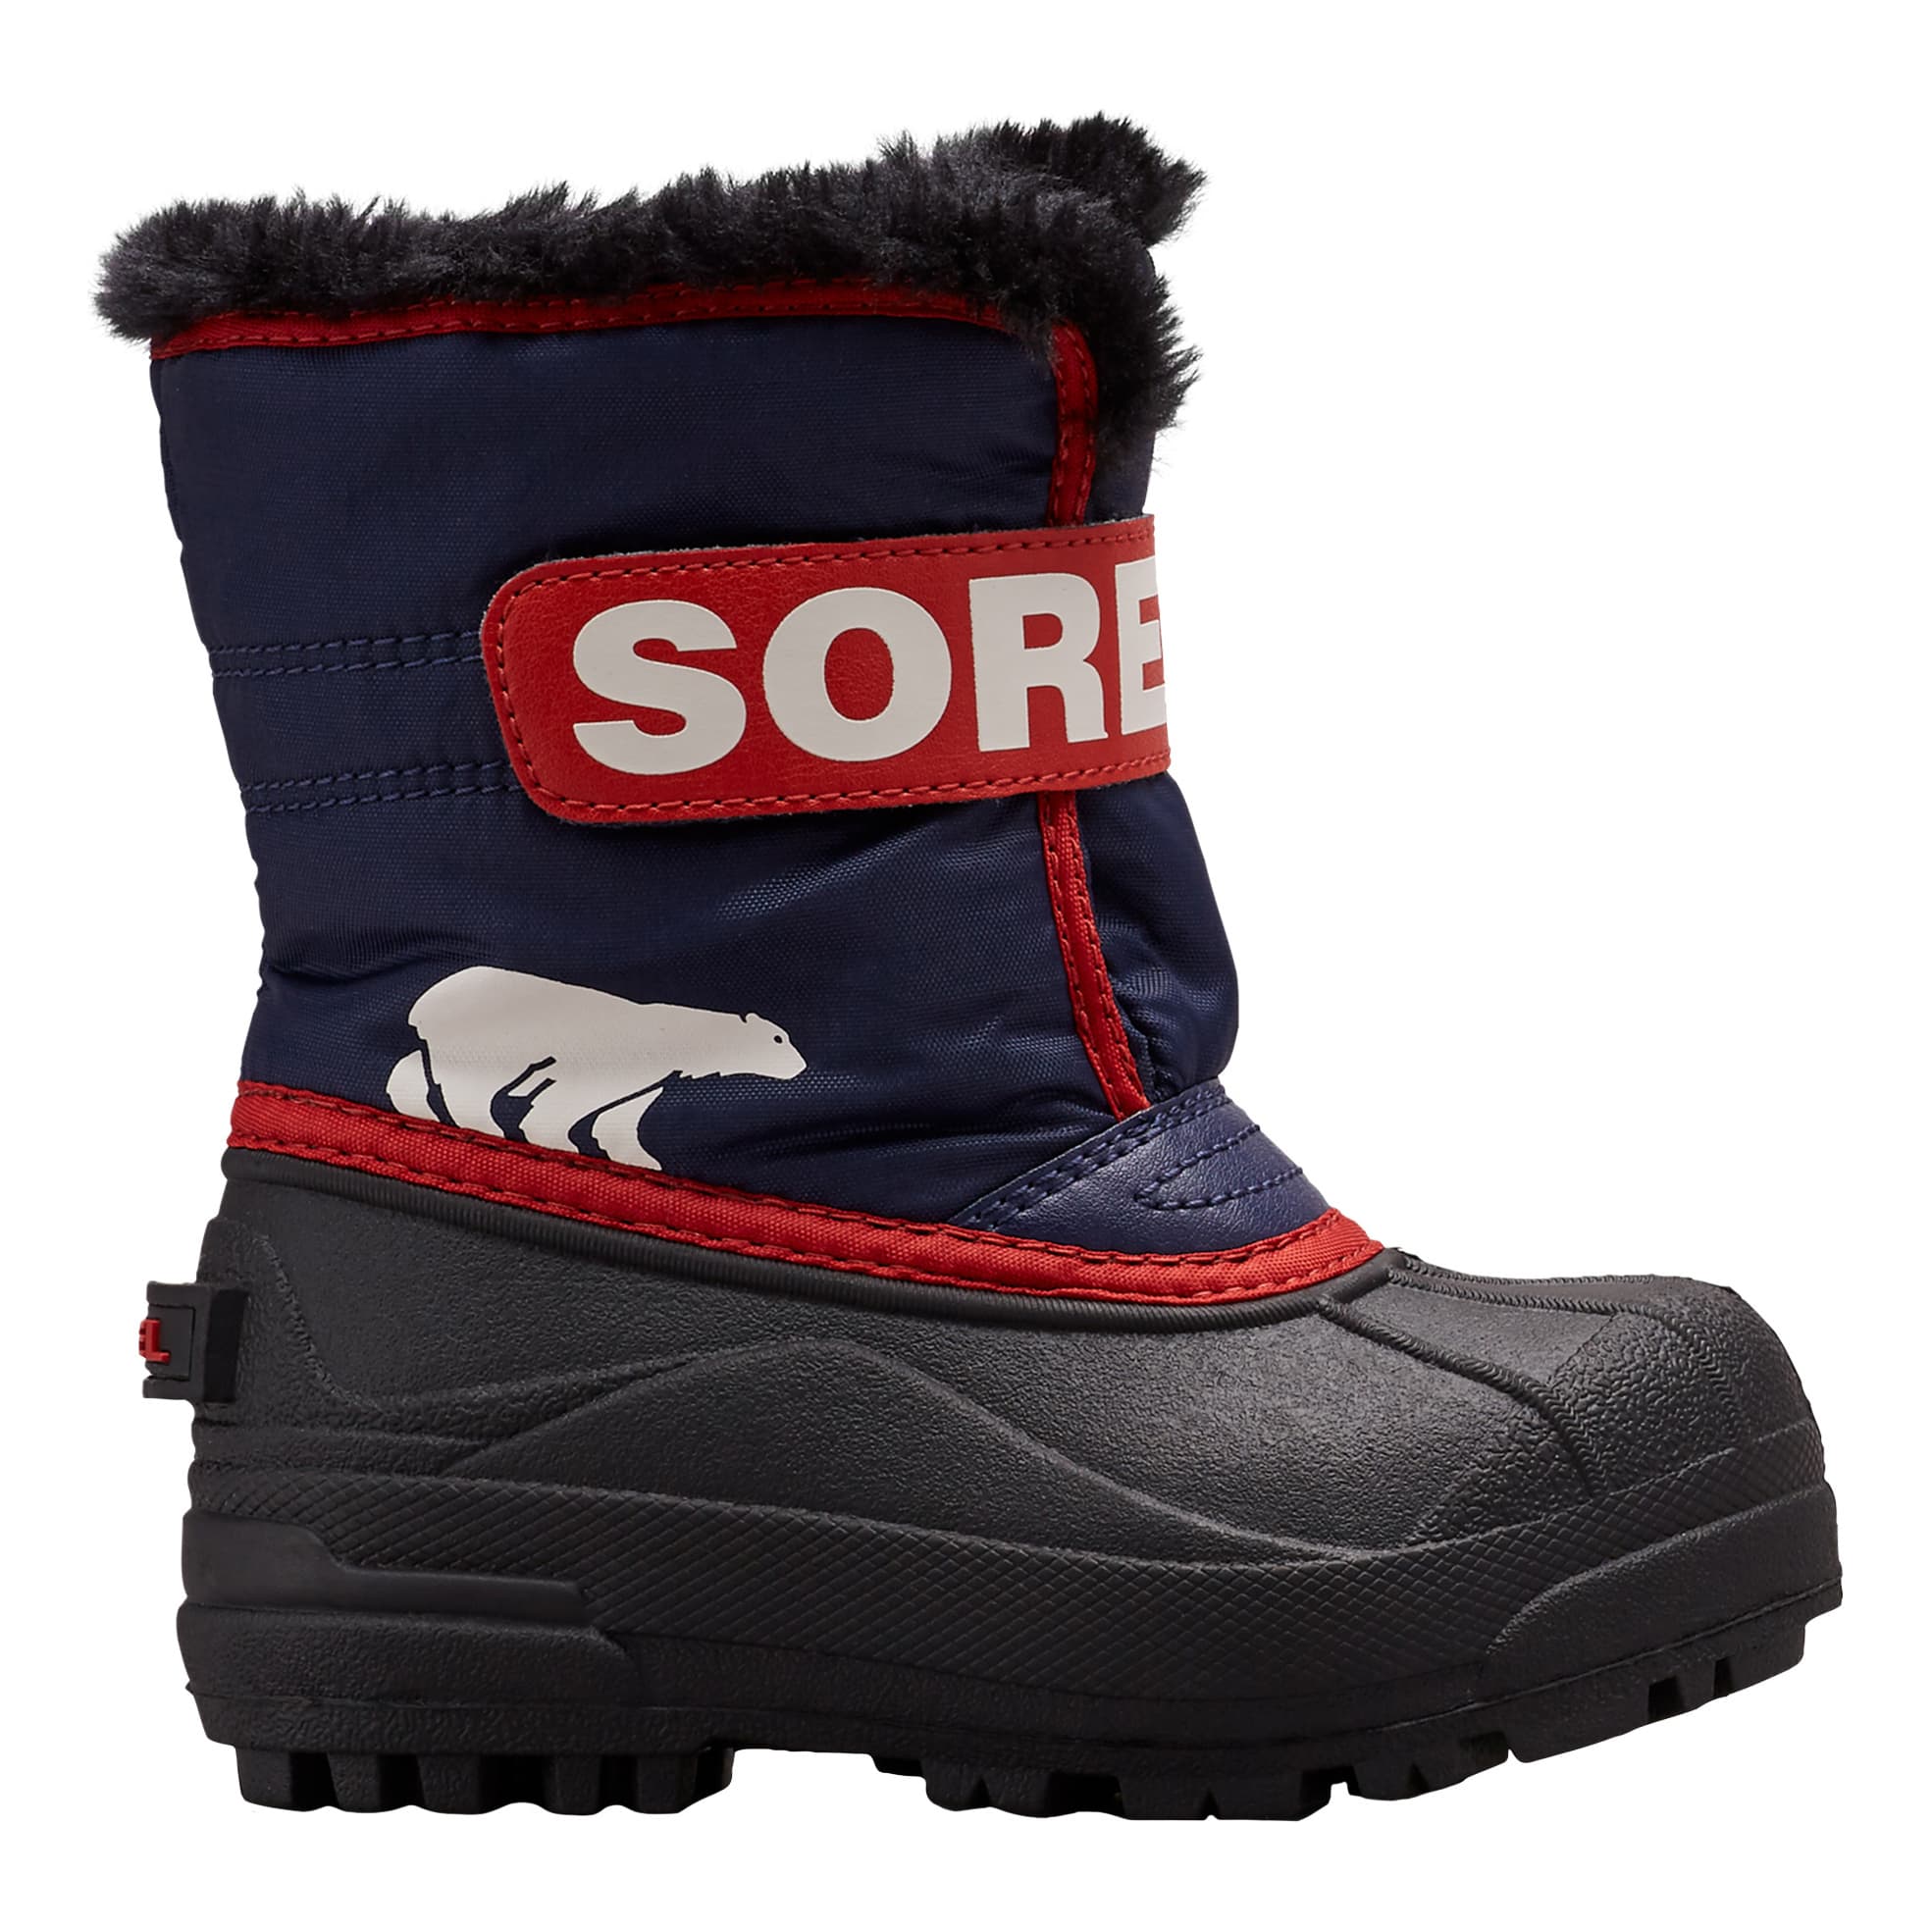 Sorel® Toddler's Snow Commander Boots - Nocturnal/Red